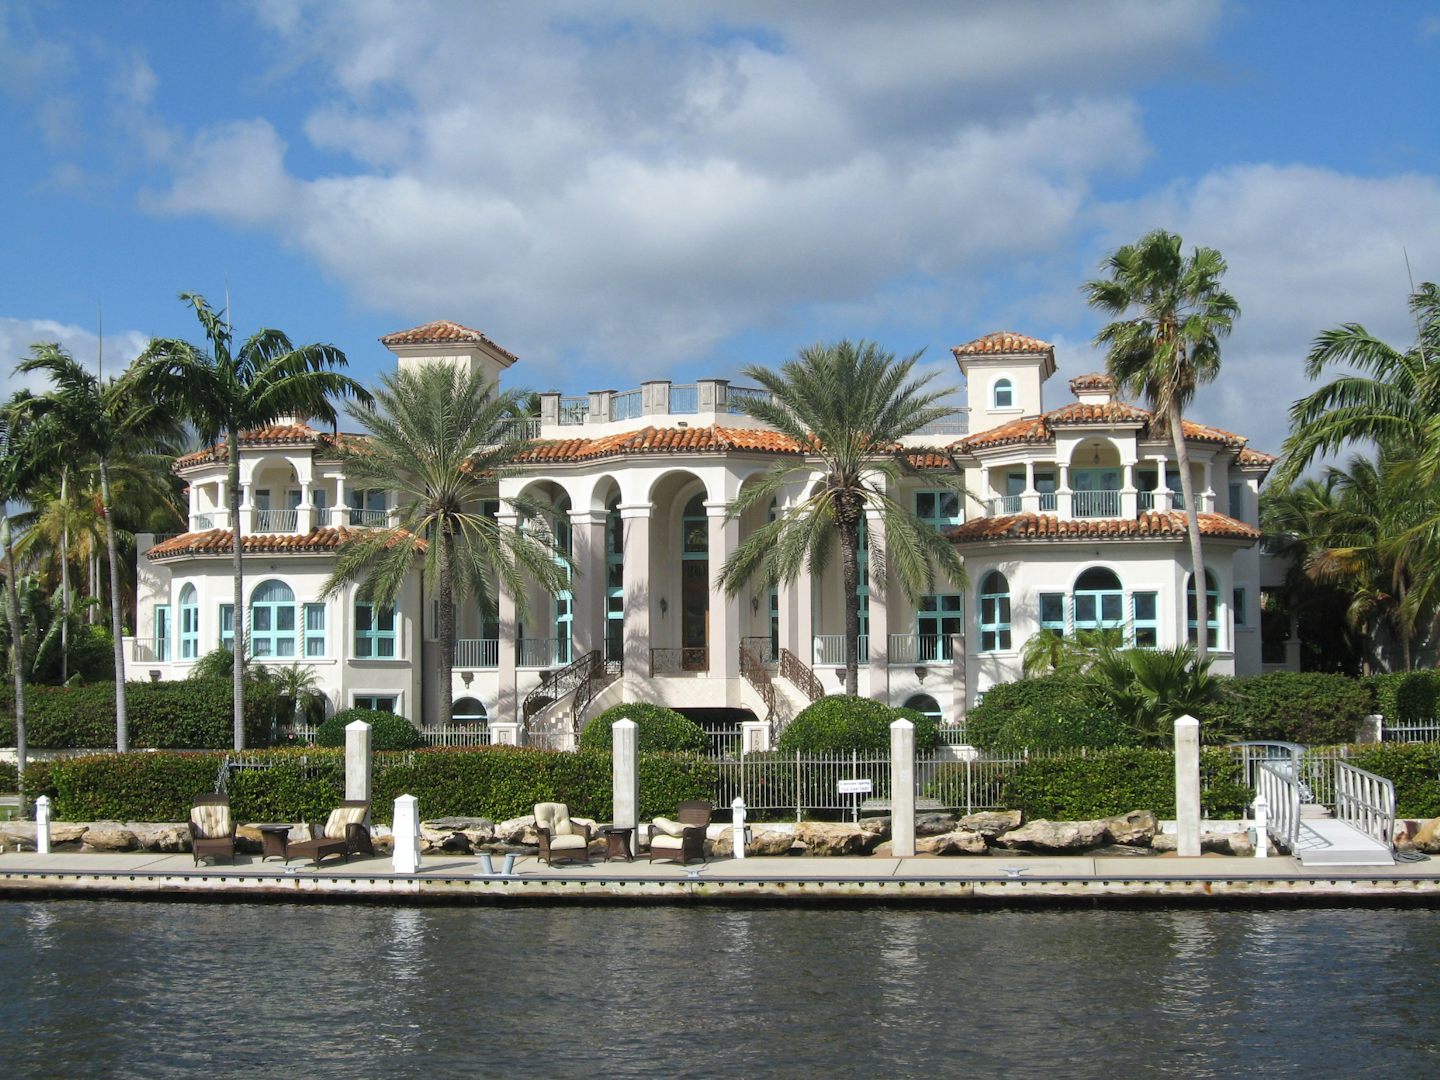 Took a tour throughout the Ft Lauderdale canals looking at the homes and yachts